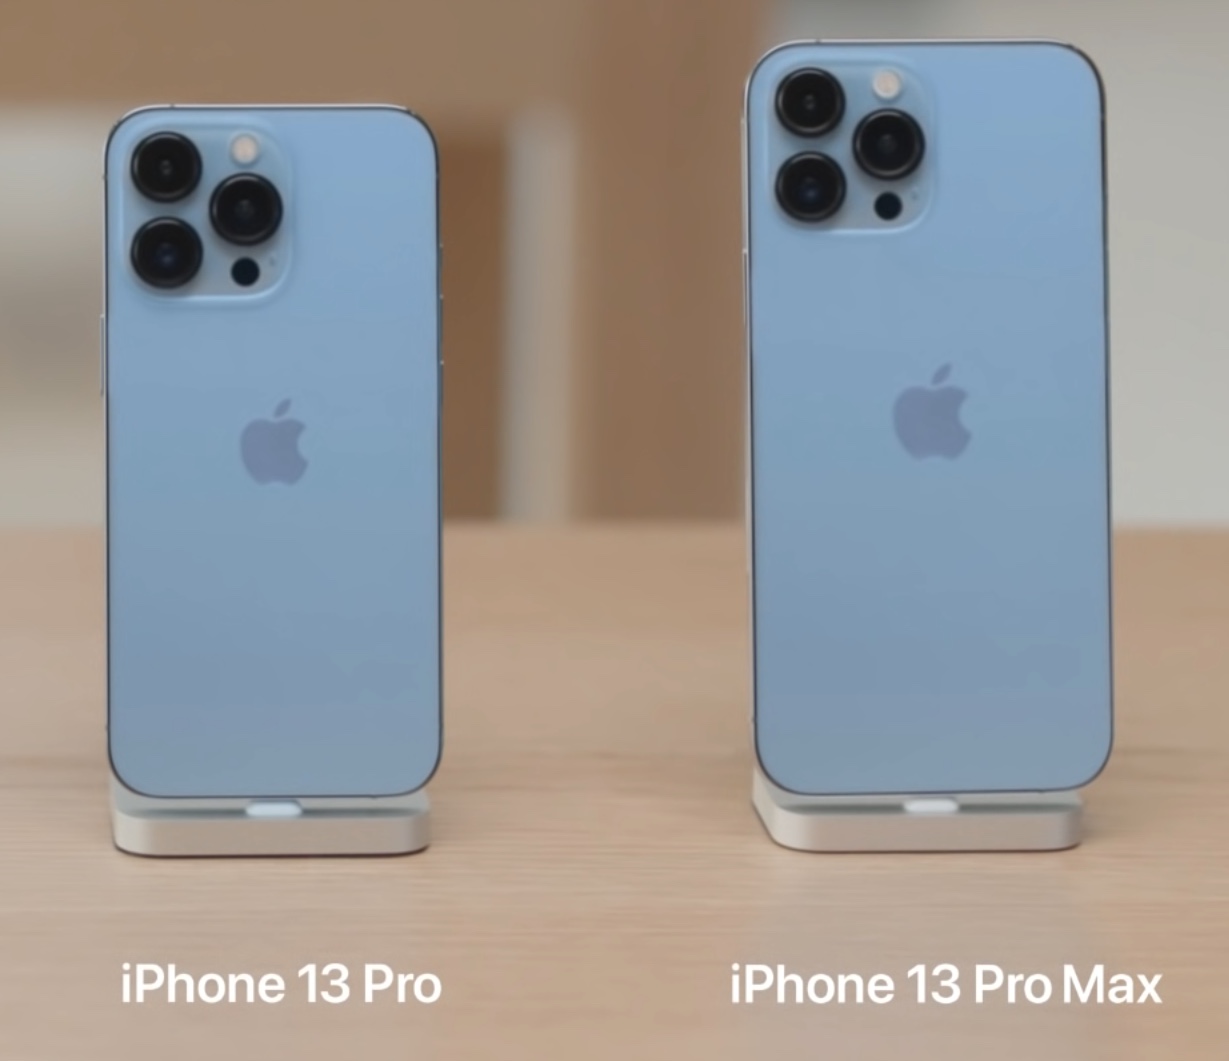 Apple Shares Video Tour Of Iphone 13 Iphone 13 Pro And Shows The True Color Of The Device All Models All Colors